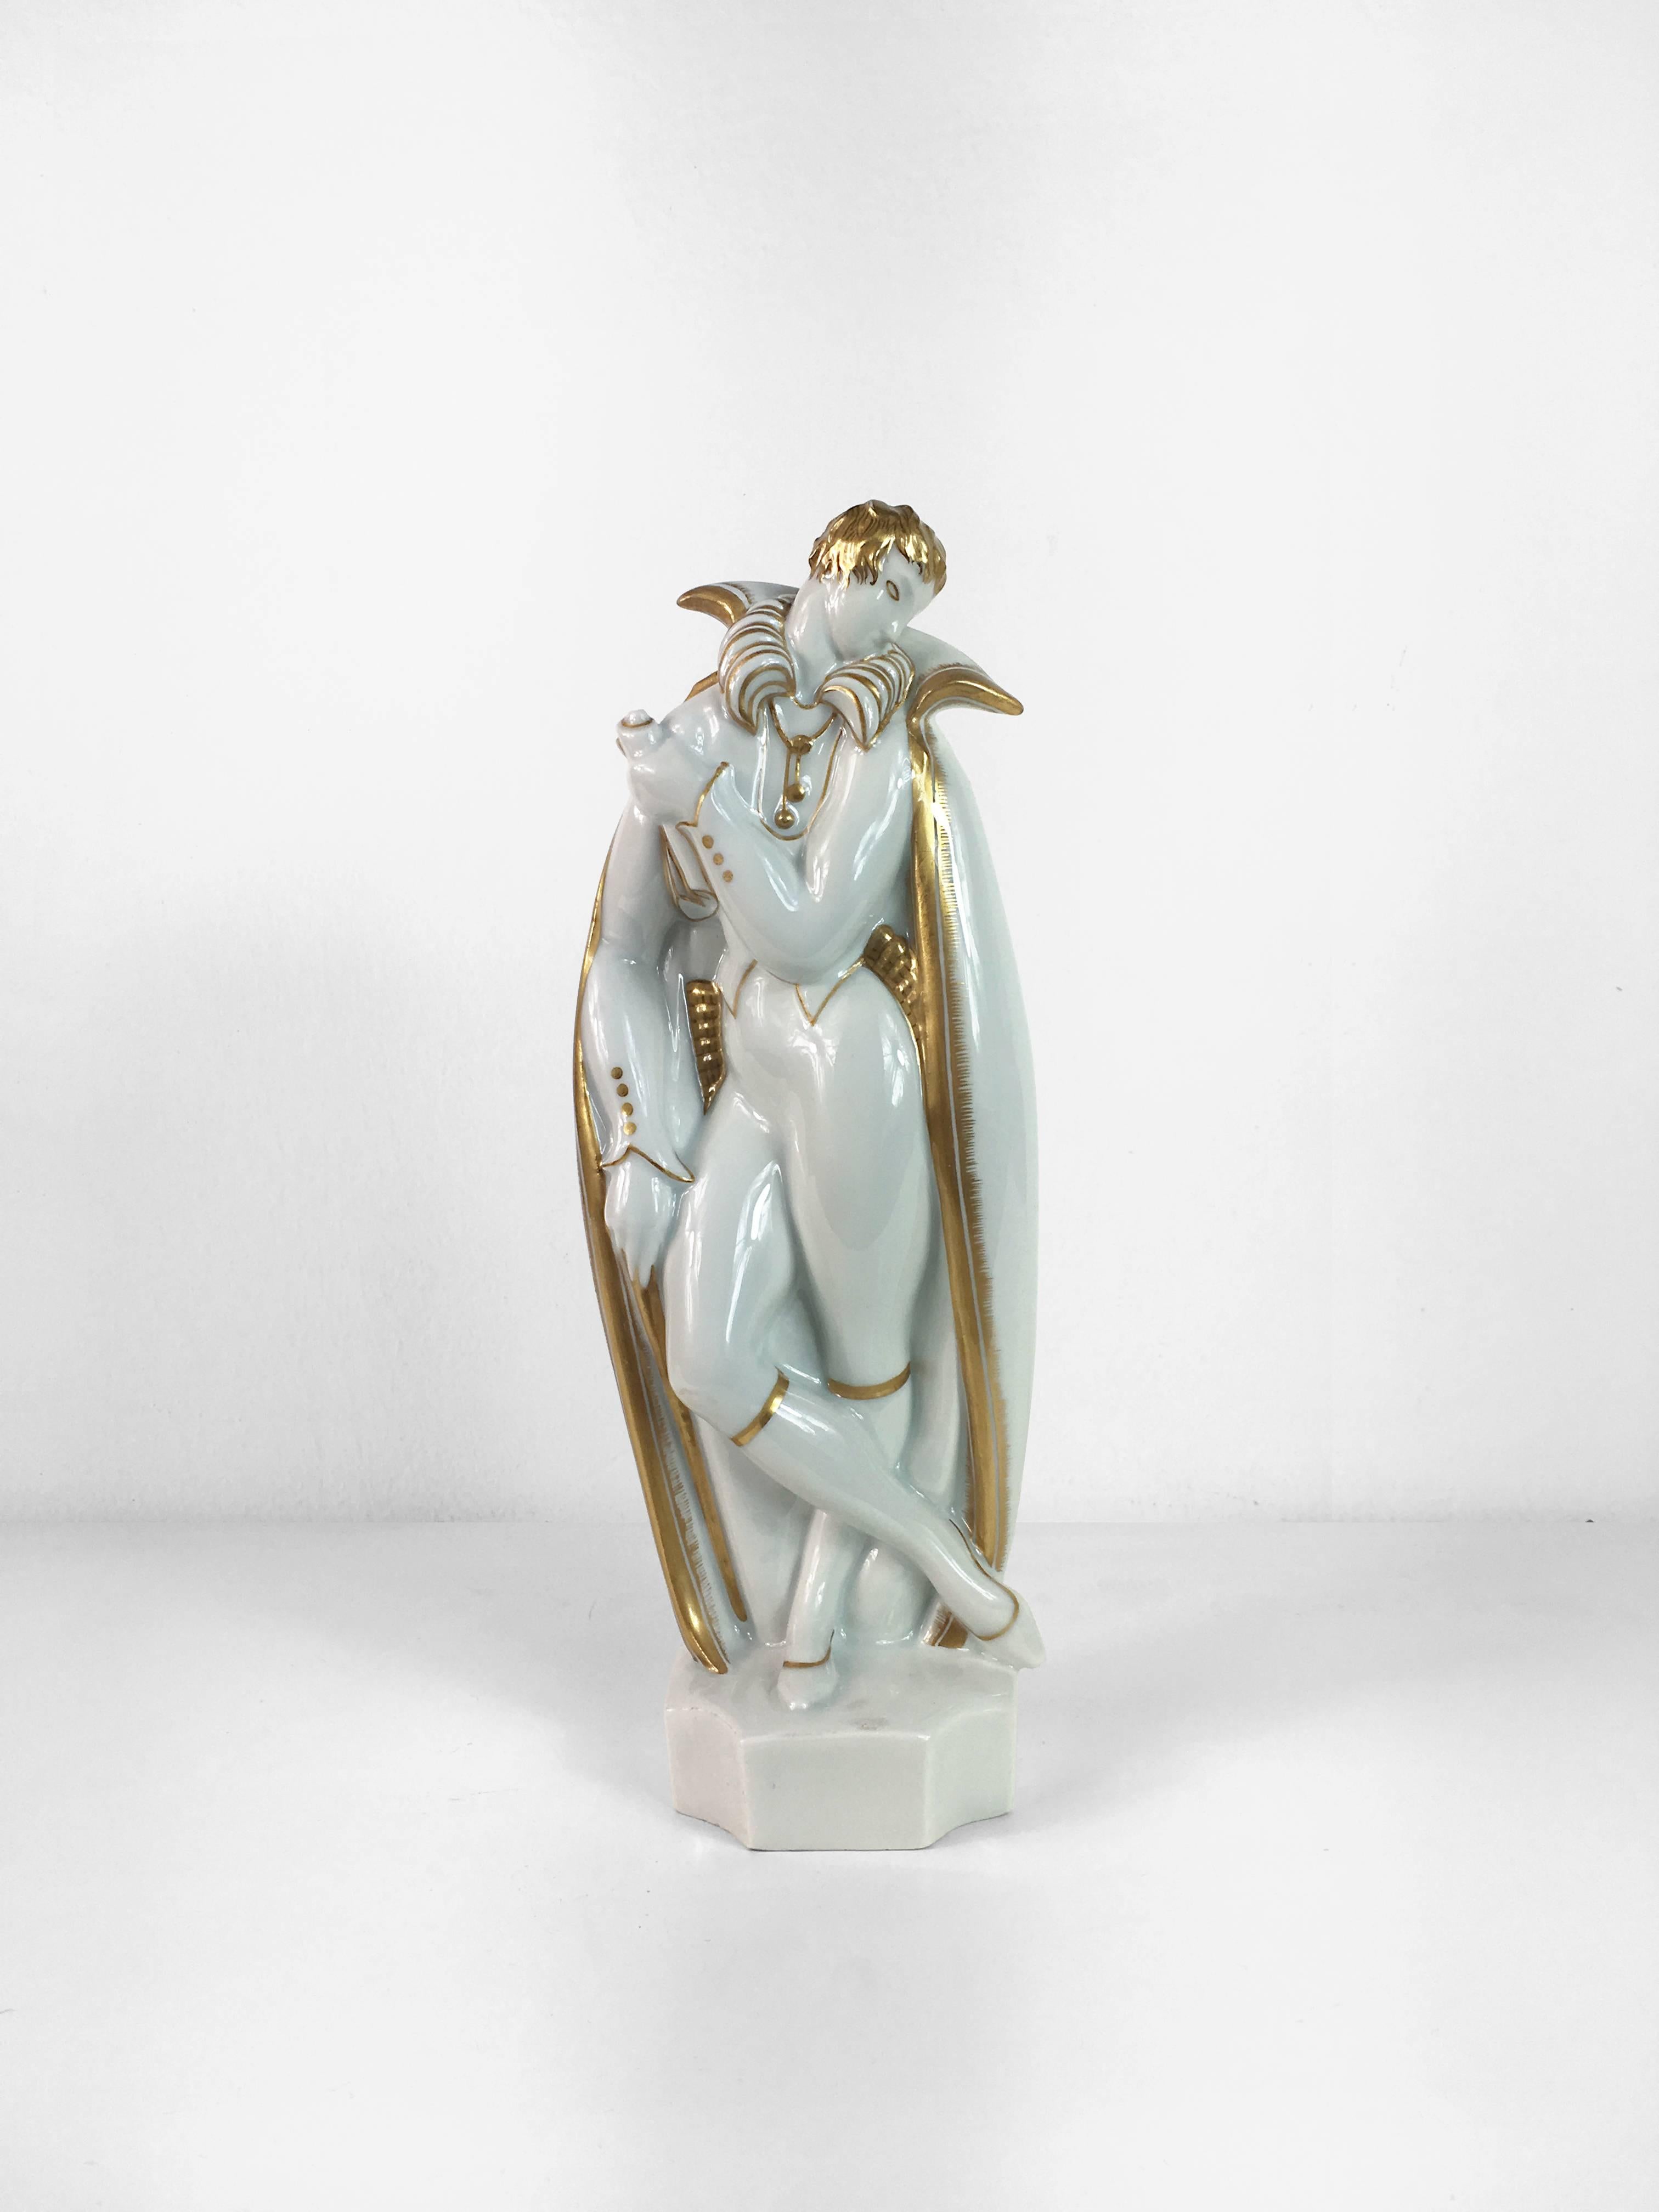 Elegant statuette, designed by Gio Ponti made of glazed ceramic with gold, was manufactured in 1927 by Richard-Ginori.